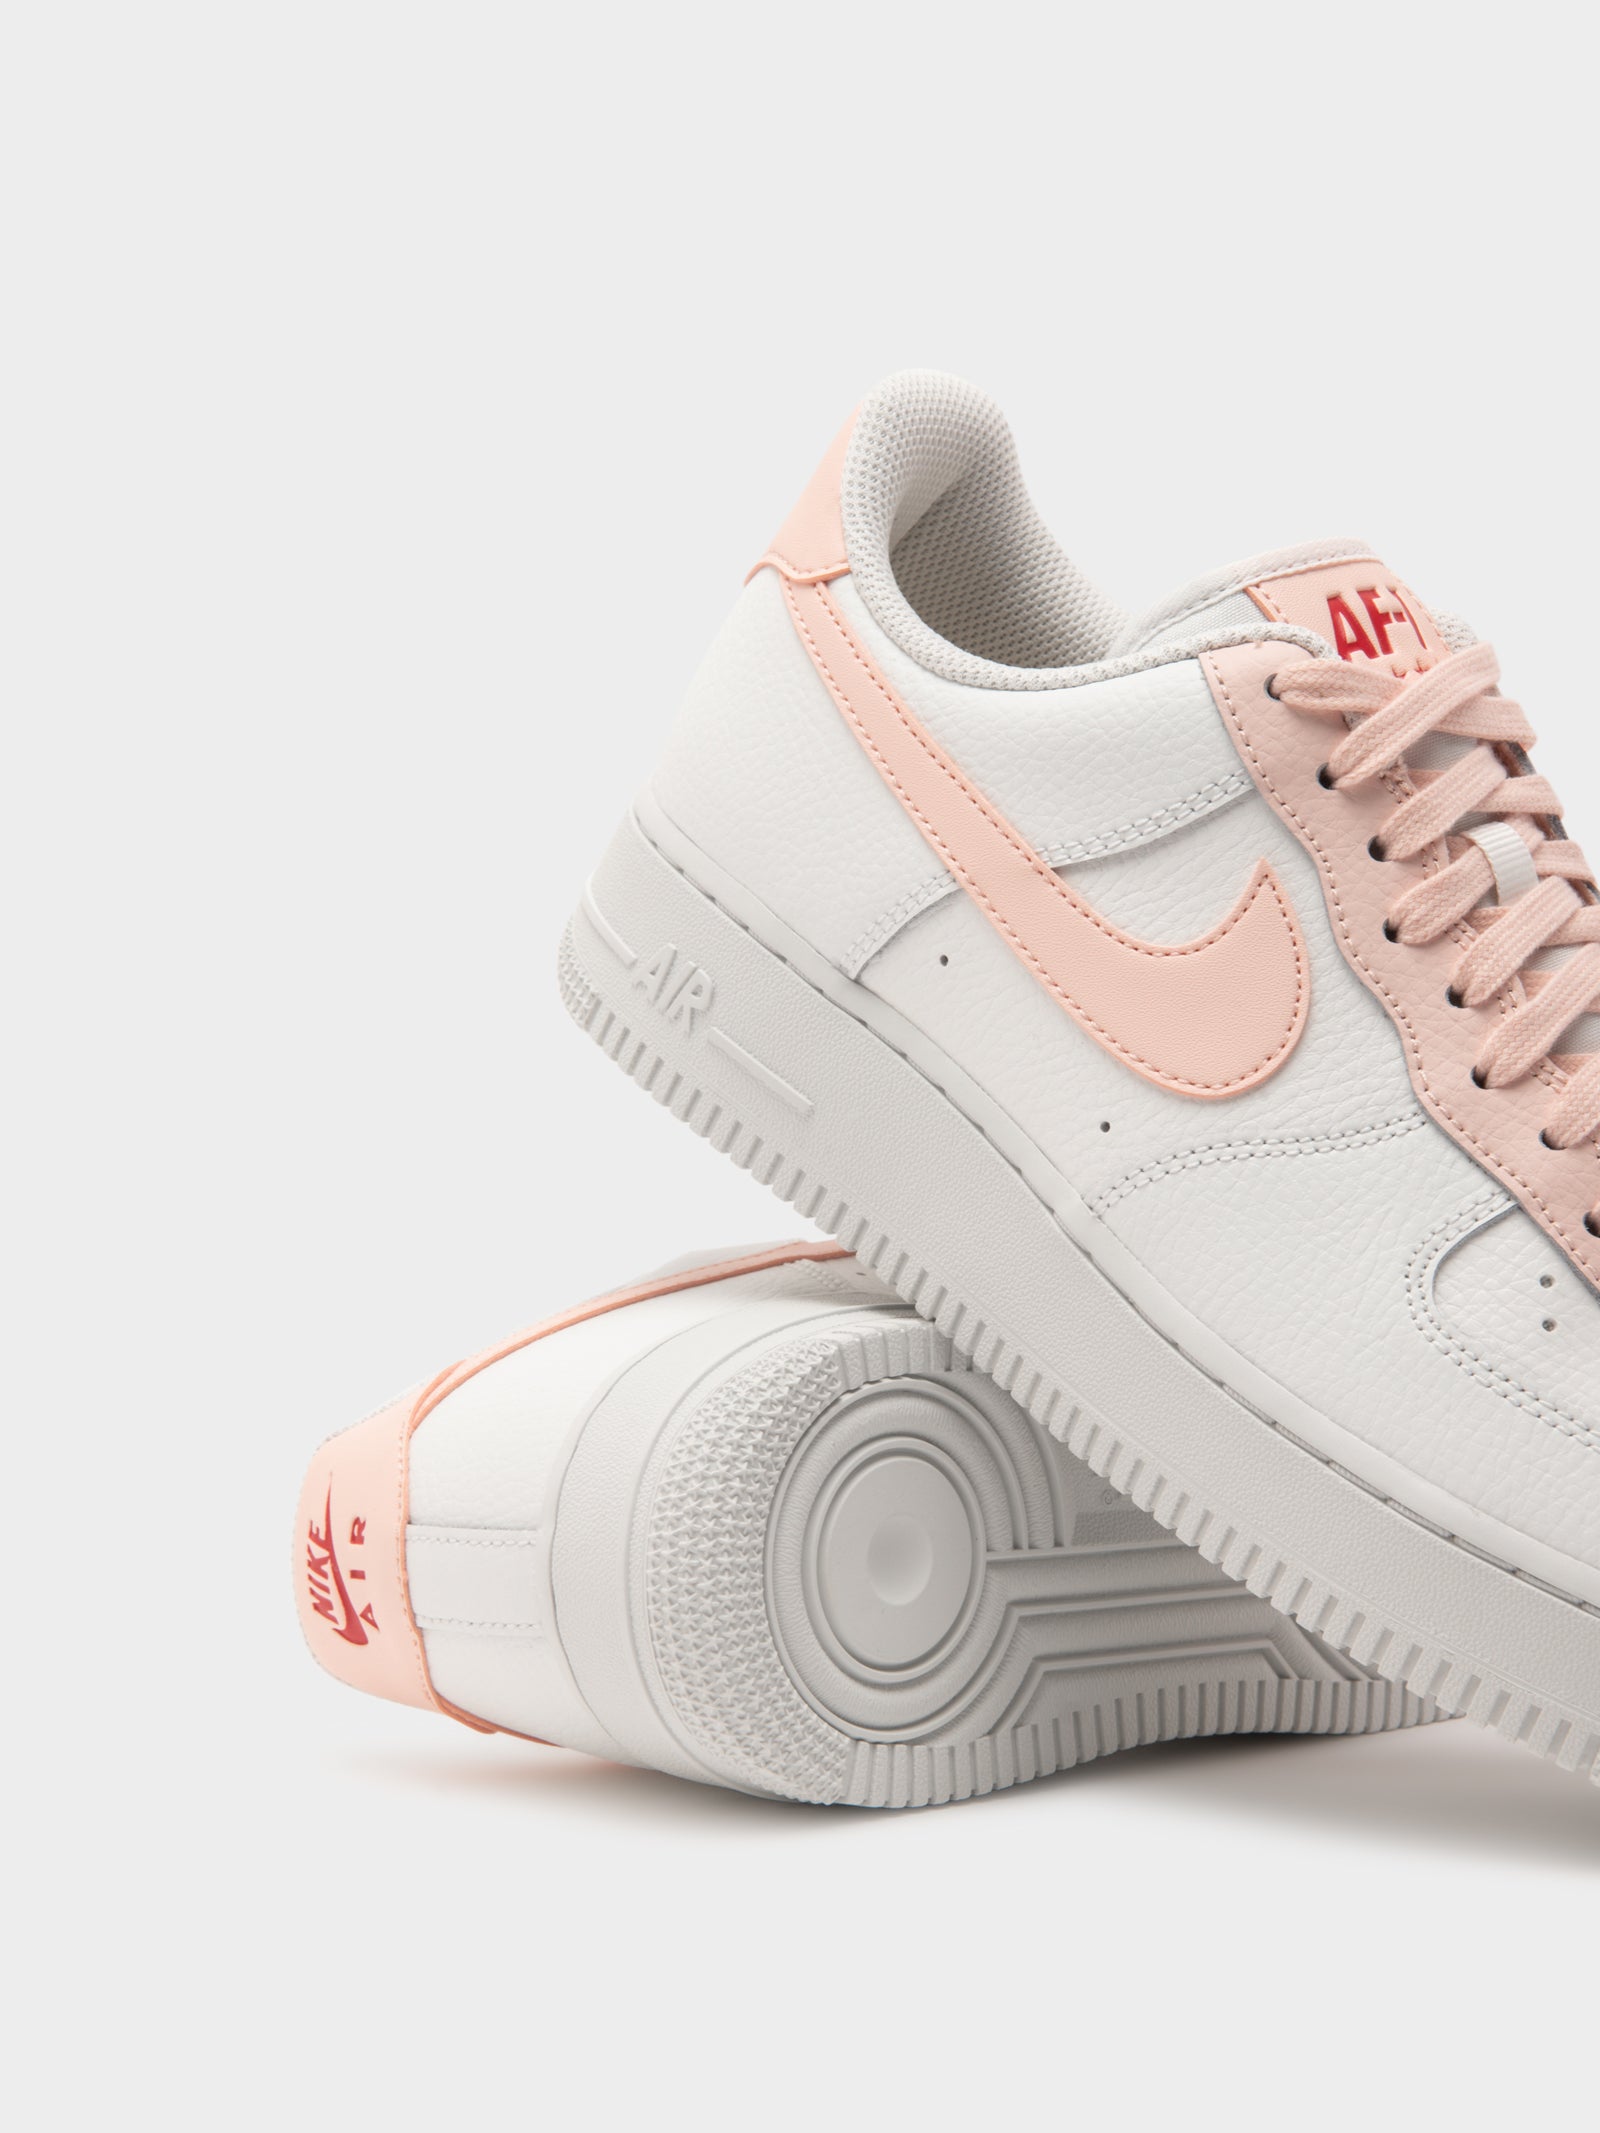 Womens Nike Air Force 1 07 in Summit White & Pale Coral - Glue Store